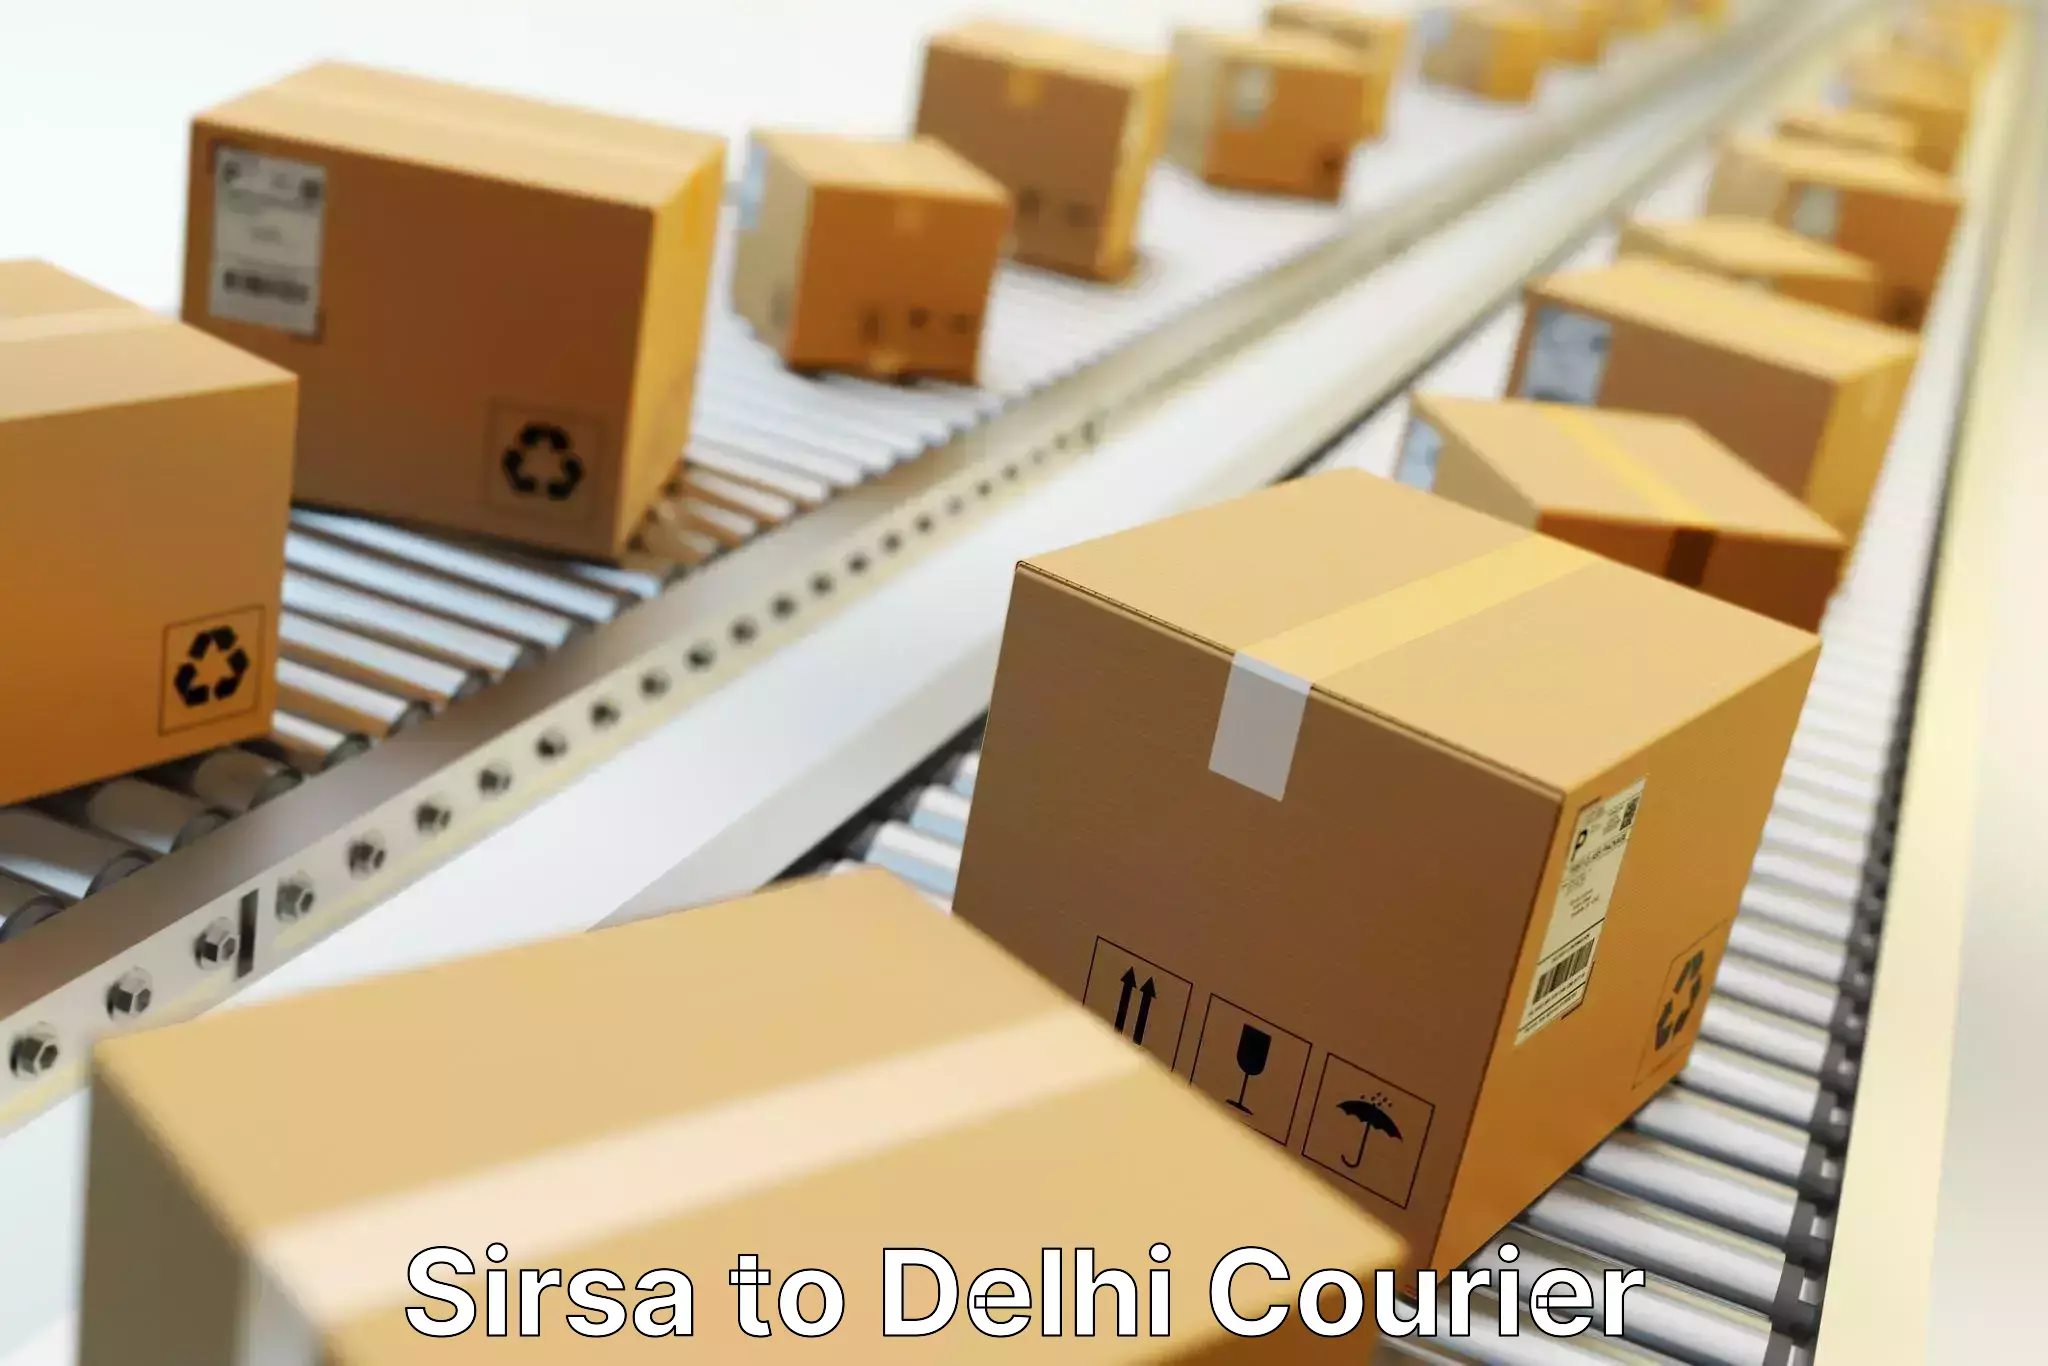 Round-the-clock parcel delivery Sirsa to NCR